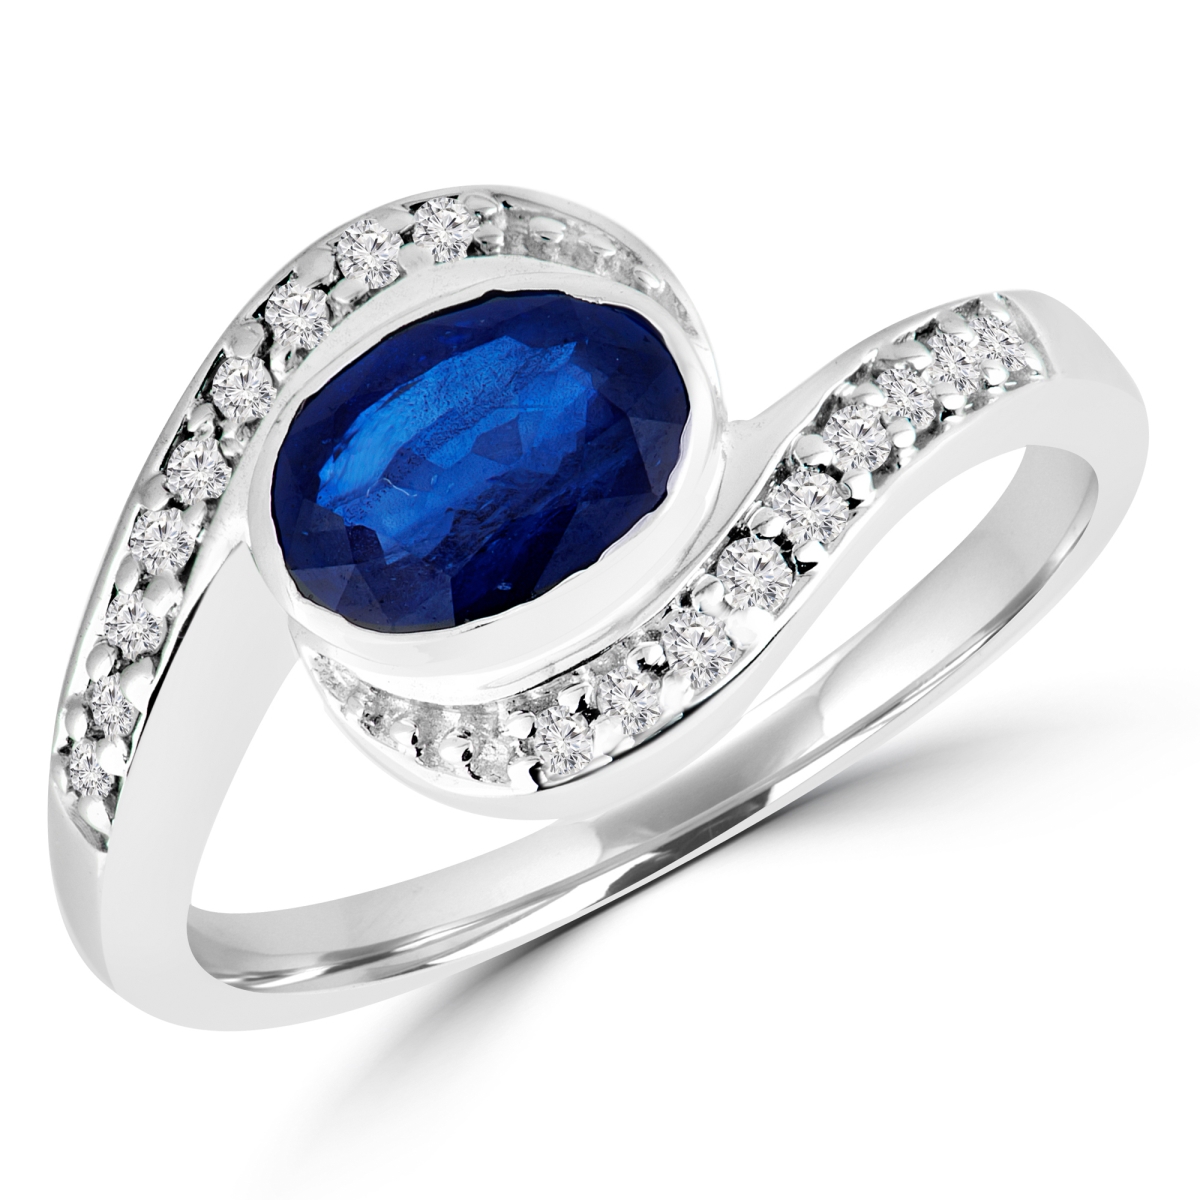 Picture of Majesty Diamonds MDR170020-P 1.1 CTW Oval Blue Sapphire Bypass Cocktail Ring in 14K White Gold